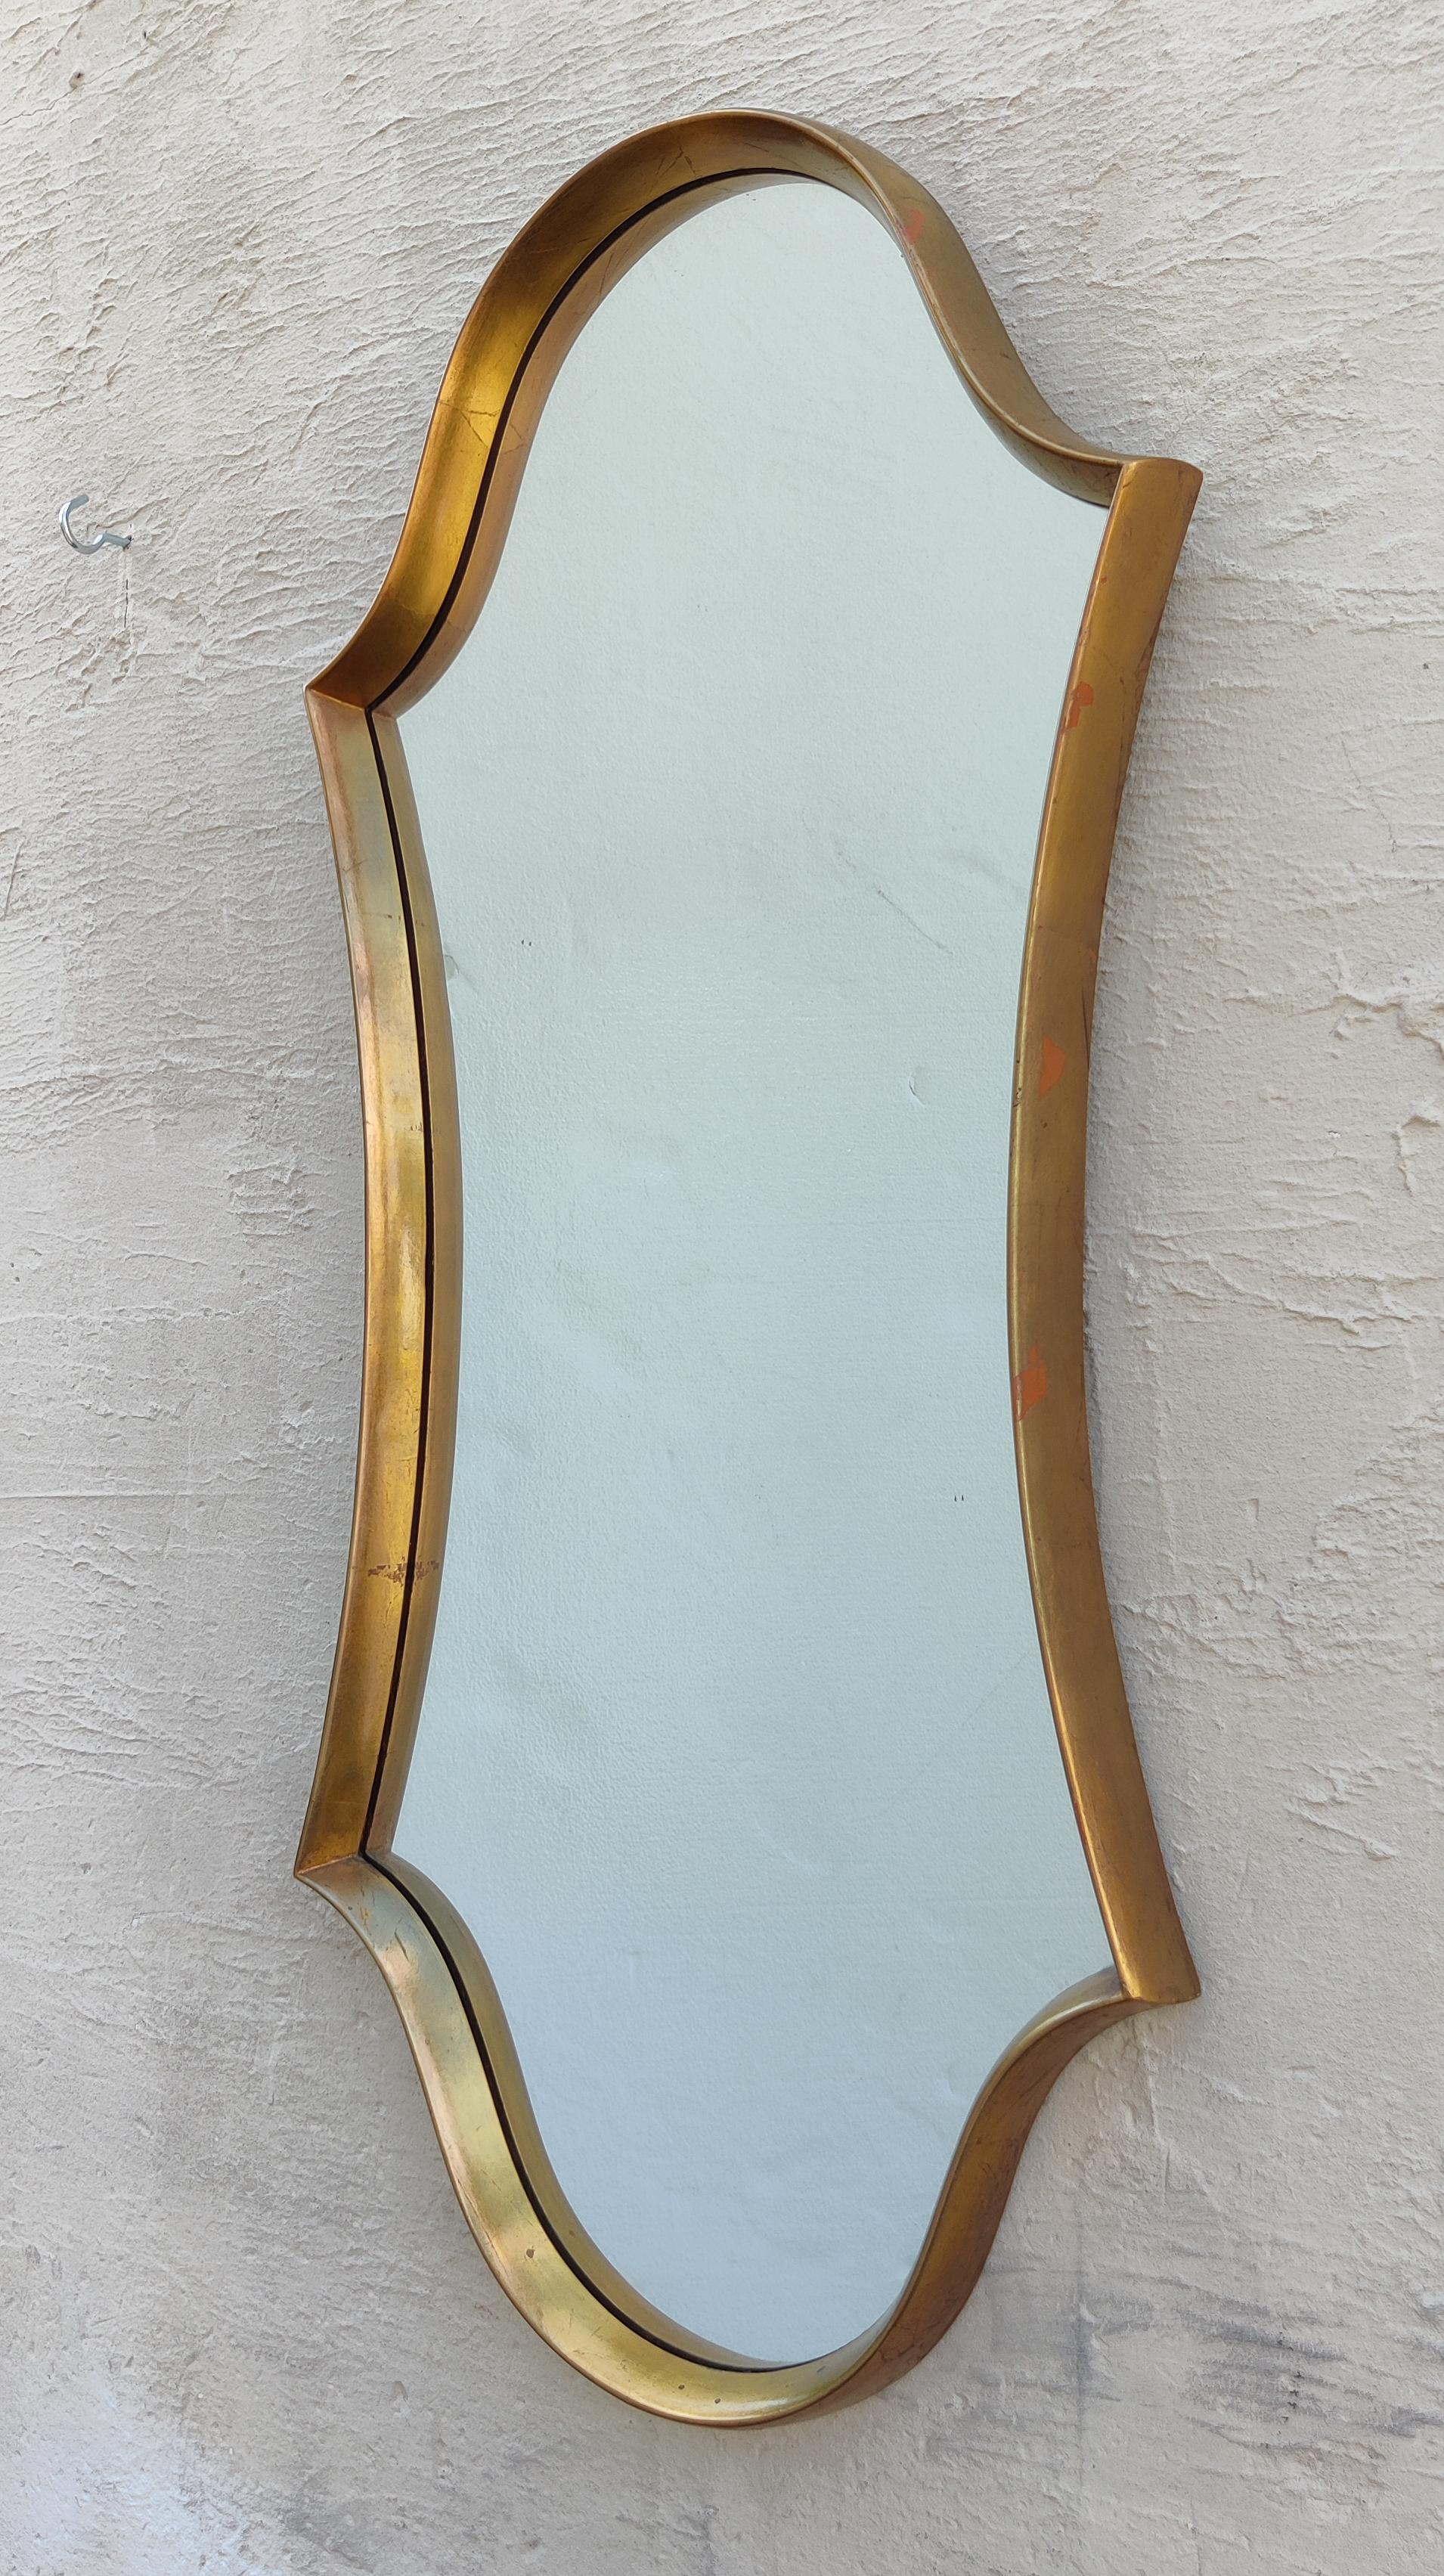 Attributed to LaBarge, this large mirror features a well-proportioned shield or crest shape with a carved and gilt wooden frame. A handsome accent piece for any modern home or hallway. 

In good vintage and original condition. No oxidation in mirror.